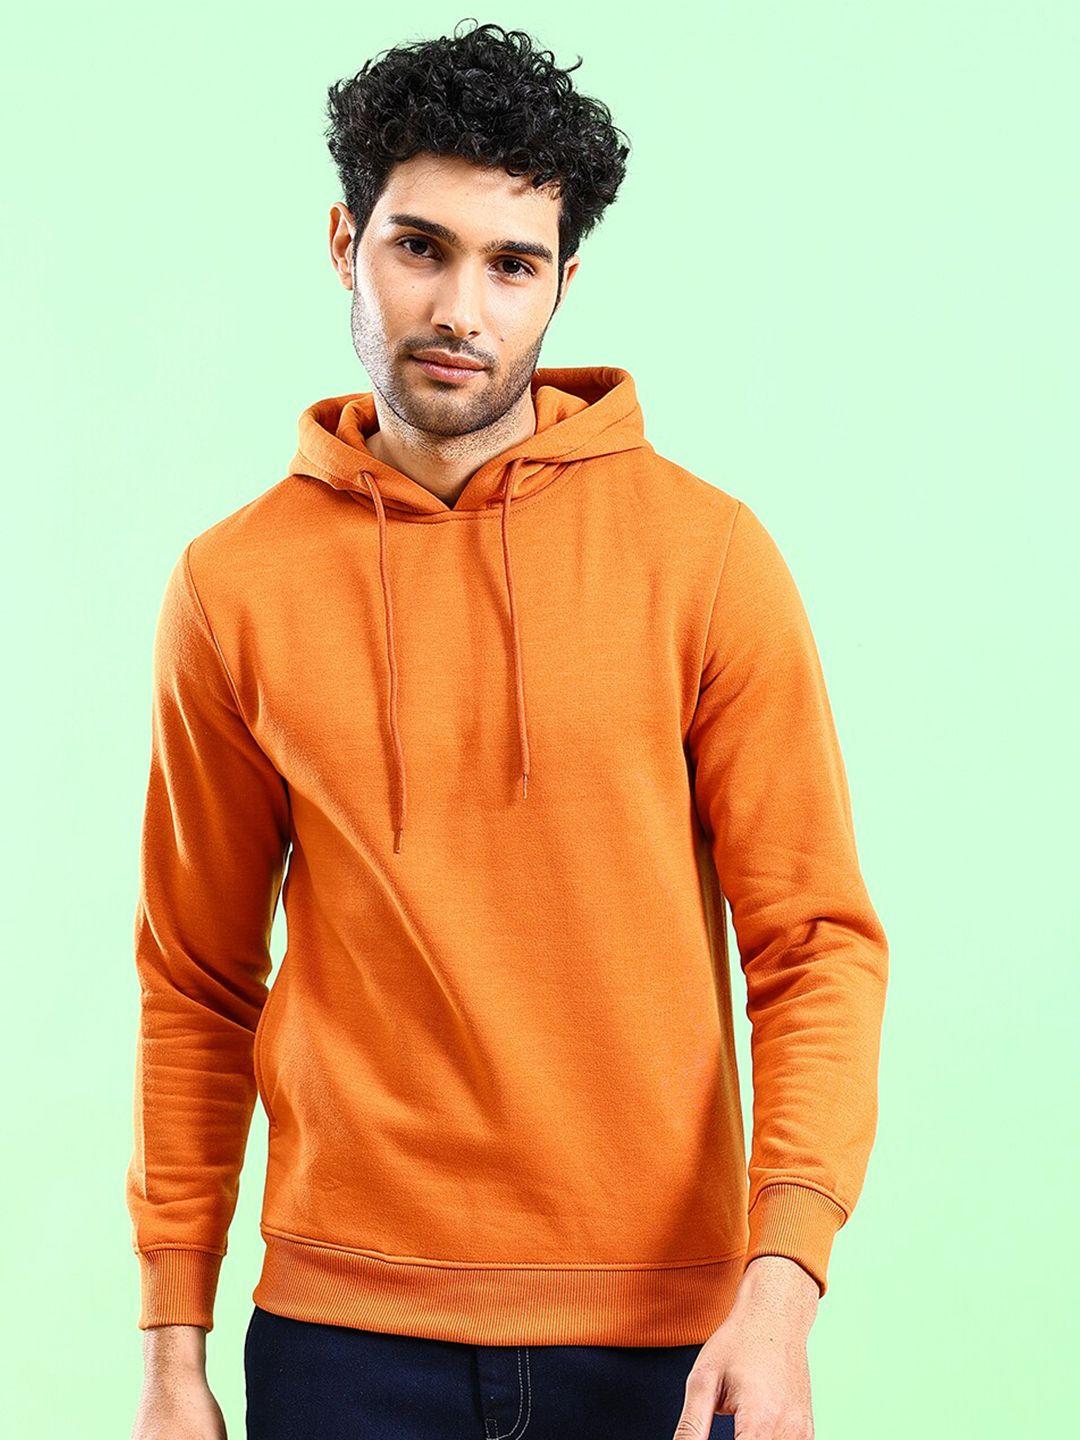 the indian garage co hooded pullover sweatshirt